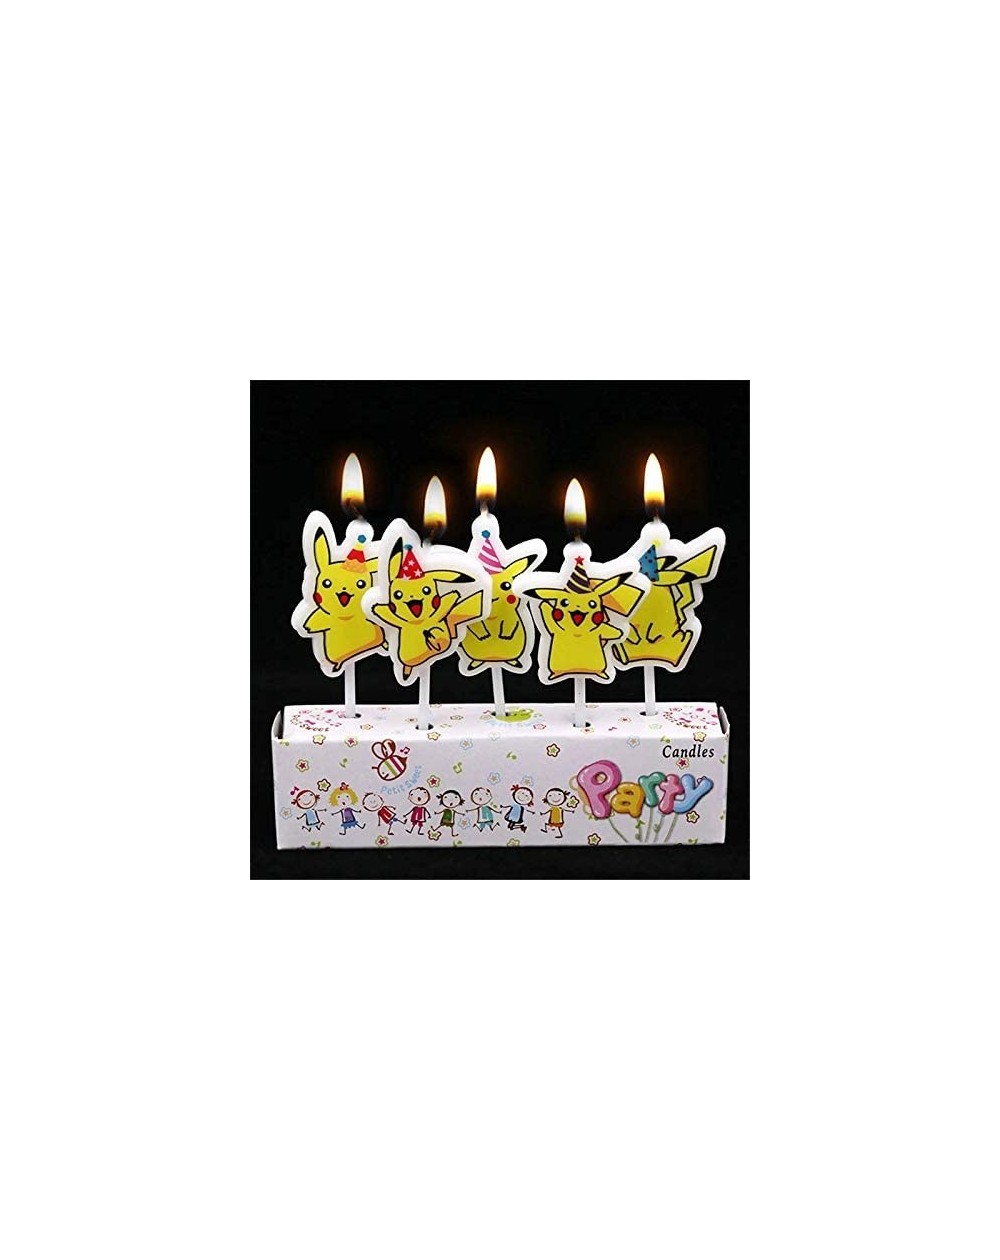 Birthday Candles PK Candles 5 Pack (Generic) Birthday Party Candles - CK18HNZQ42M $12.61